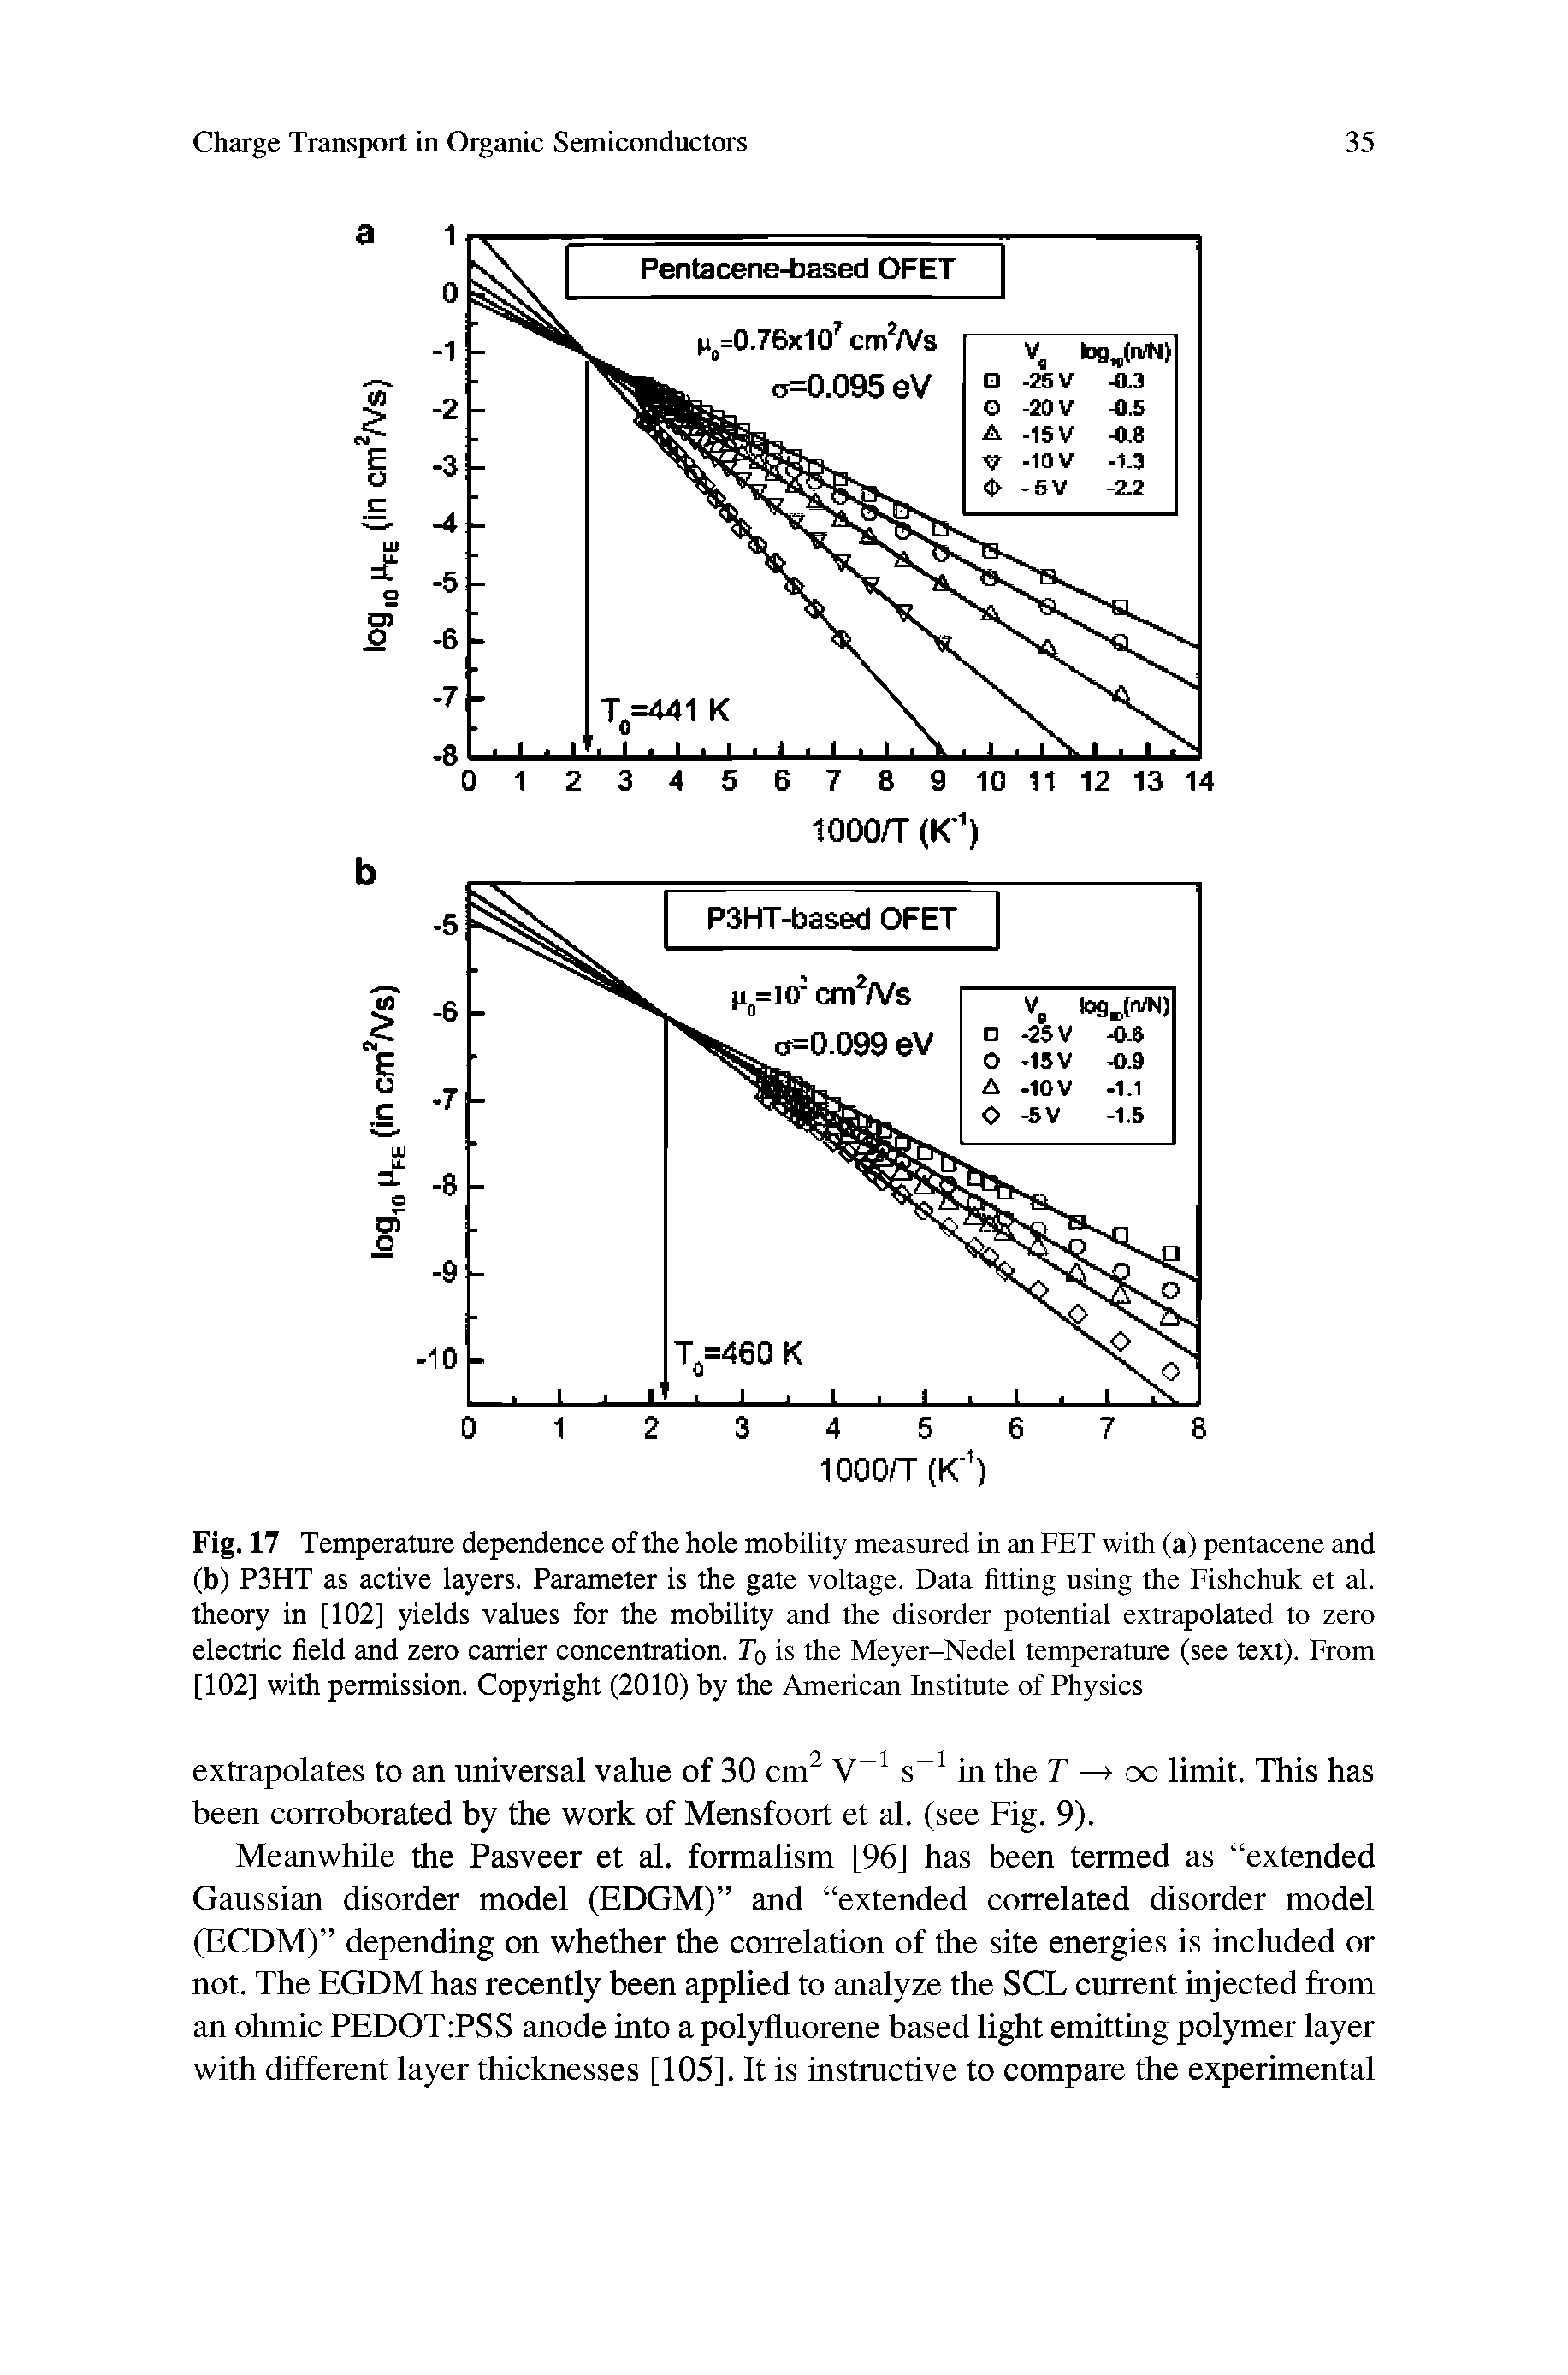 Fig. 17 Temperature dependence of the hole mobility measured in an FET with (a) pentacene and (b) P3HT as active layers. Parameter Is the gate voltage. Data fitting using the Fishchuk et al. theory in [102] yields values for the mobility and the disorder potential extrapolated to zero electric field and zero carrier concentration. To is the Meyer-Nedel temperature (see text). From [102] with permission. Copyright (2010) by the American Institute of Physics...